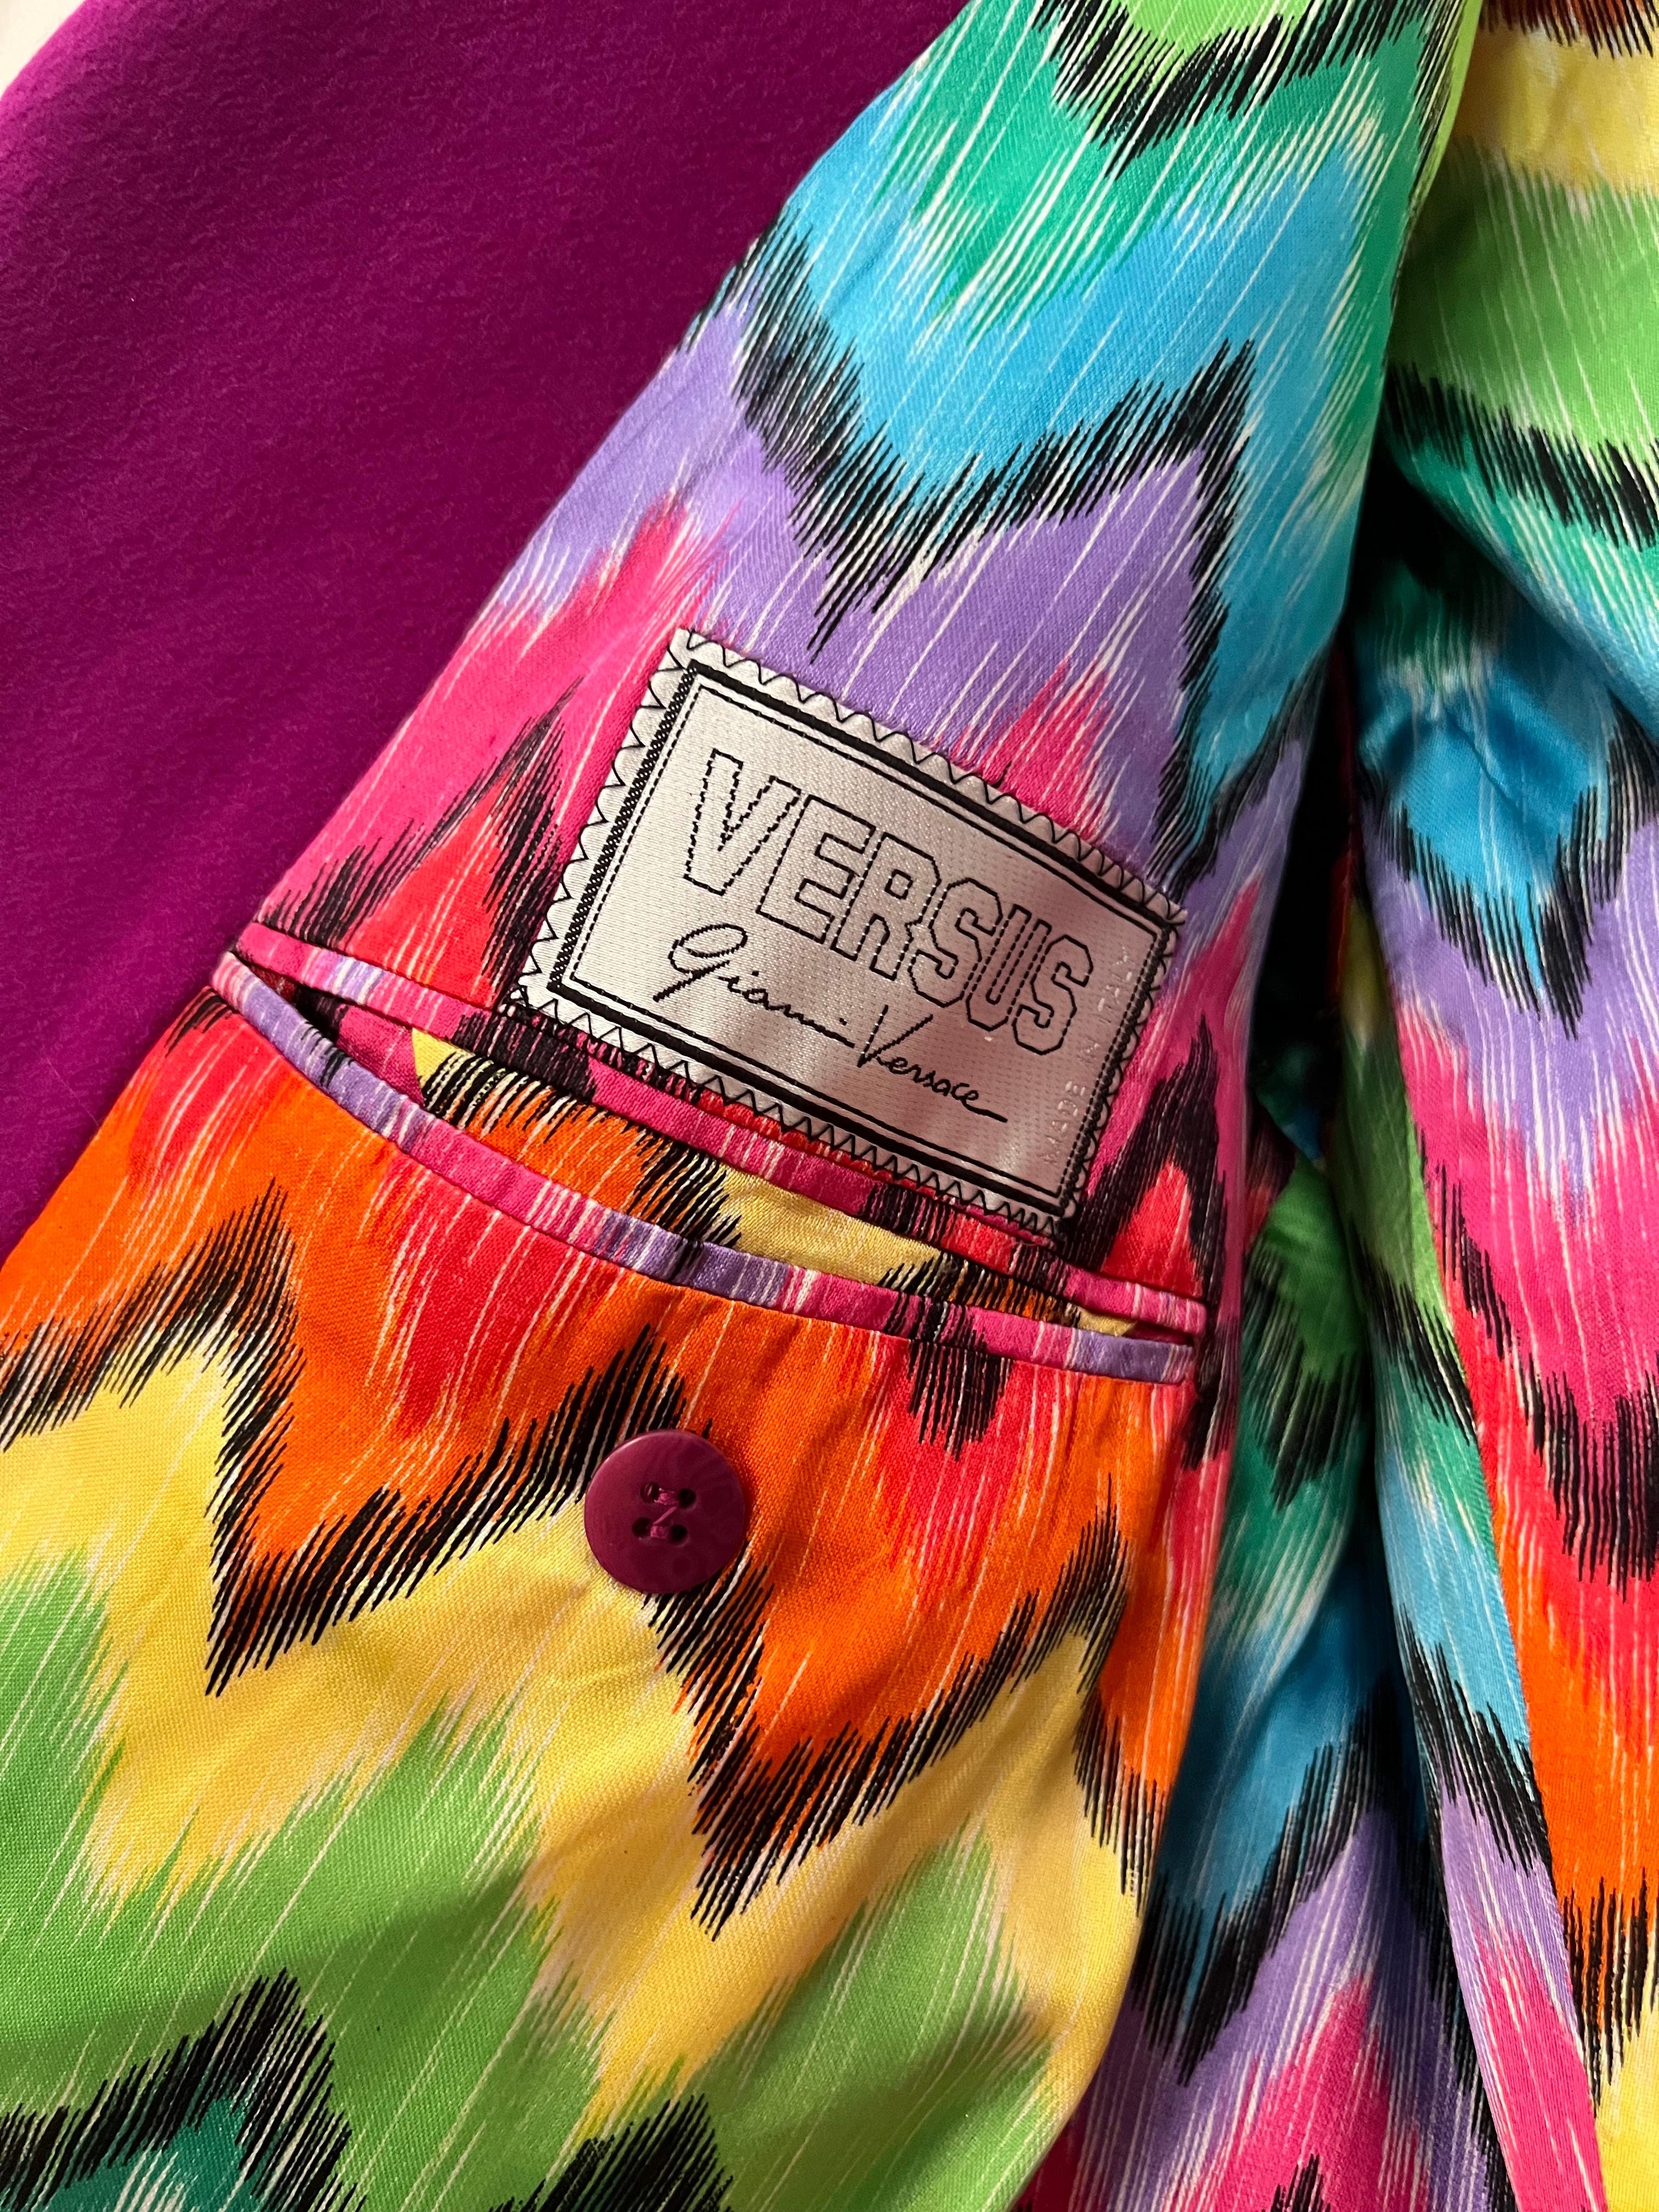 Versus by Gianni Versace Magenta Pink Rainbow Lined Cashmere Blazer Suit Jacket For Sale 4